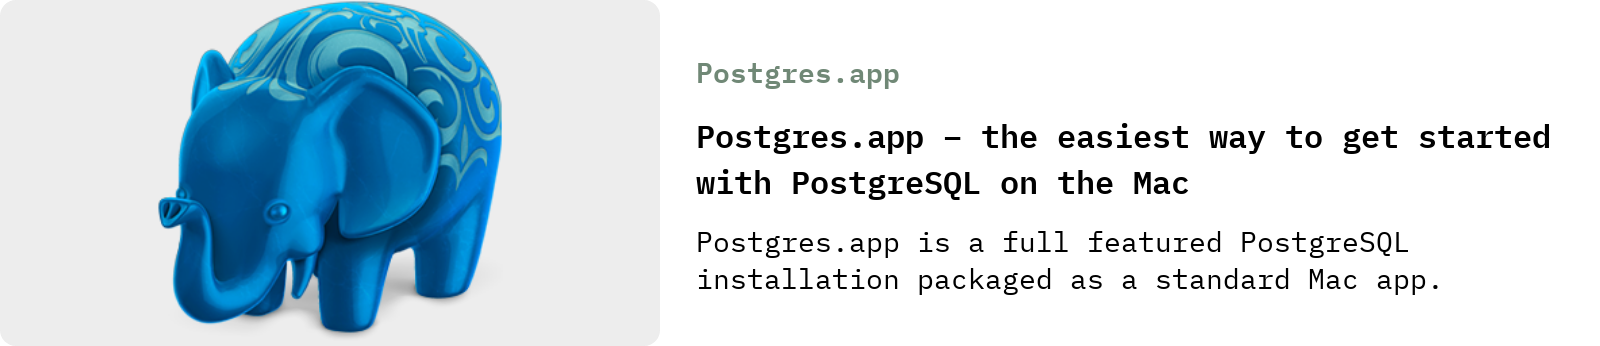 From Postgres.app: Postgres.app – the easiest way to get started with PostgreSQL on the Mac | Postgres.app is a full featured PostgreSQL installation packaged as a standard Mac app.